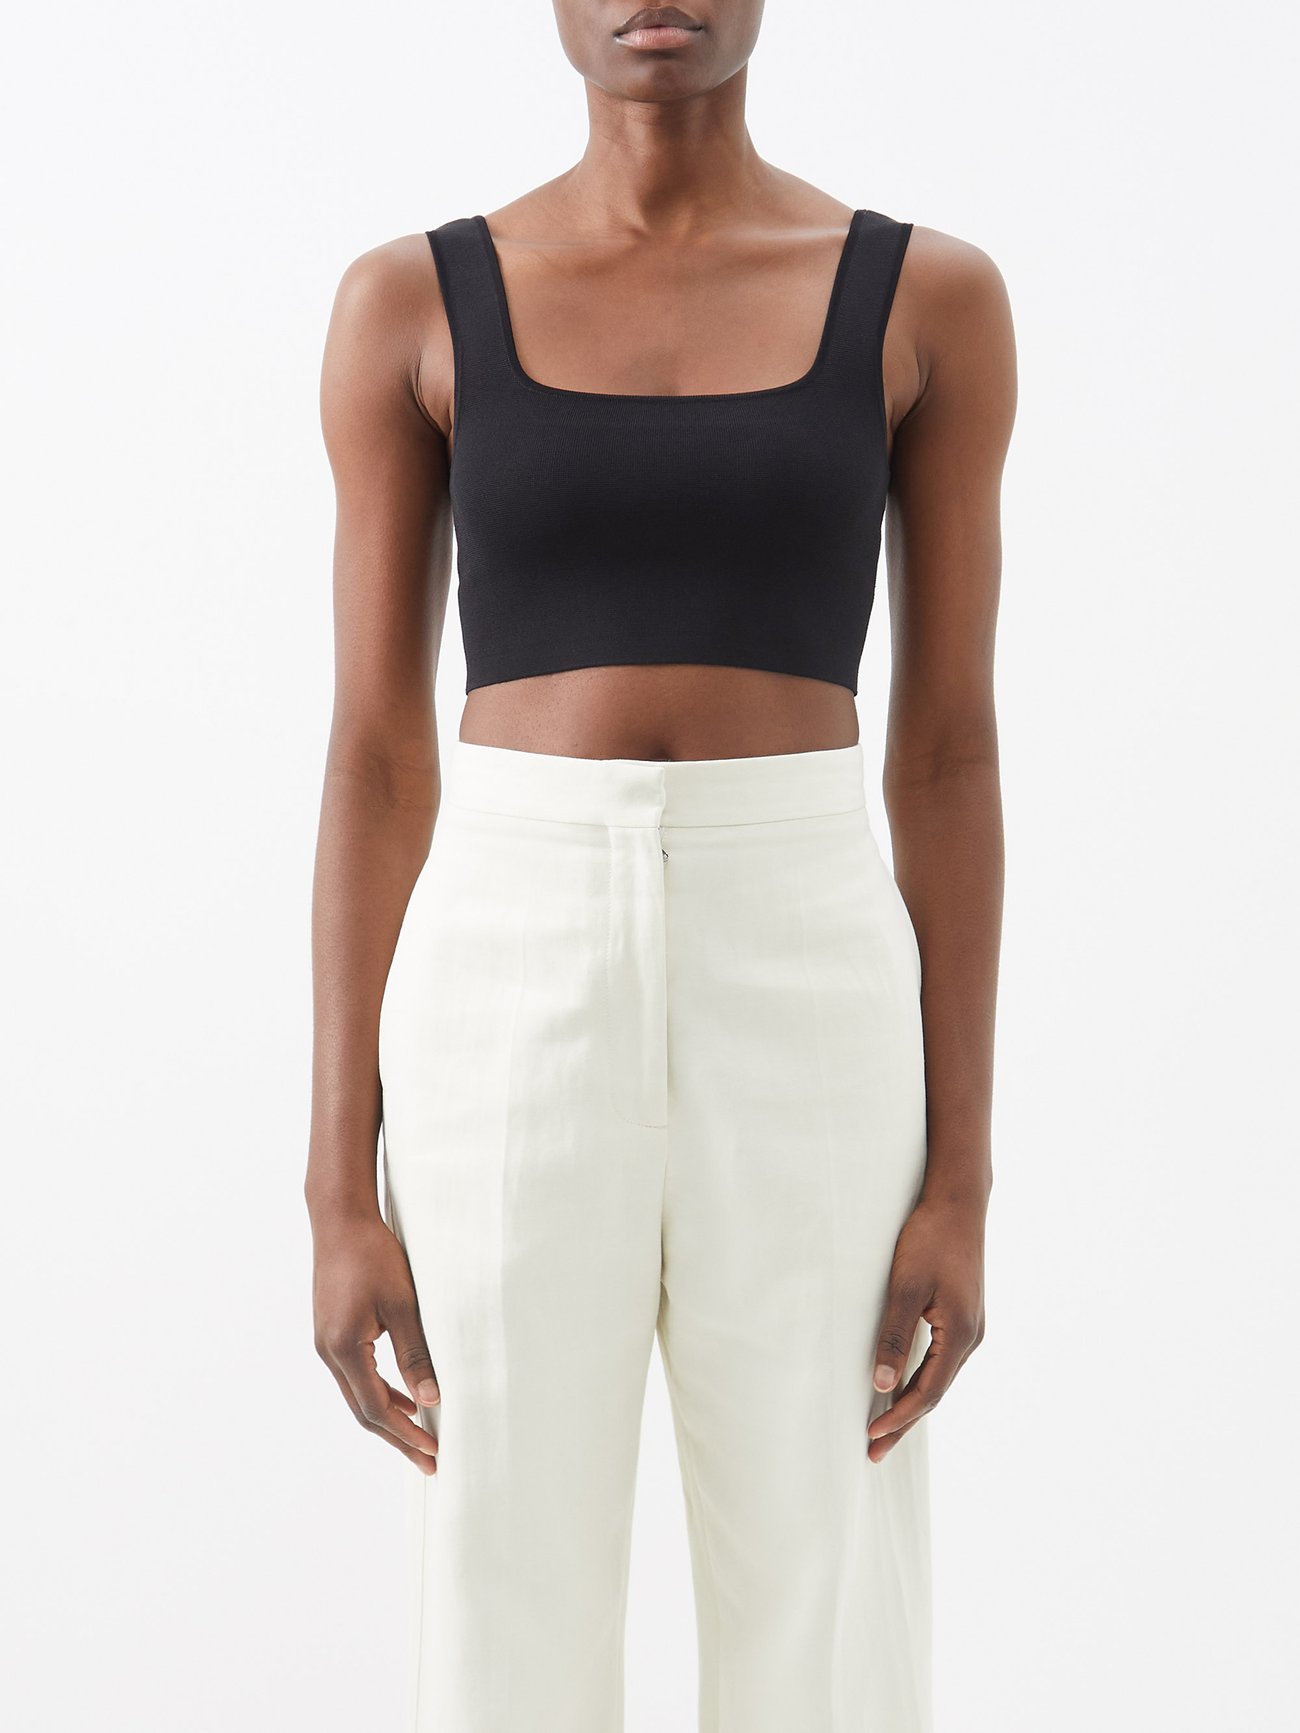 Drawing inspiration from 1990s minimalism, Matteau’s black The Nineties crop top has a flattering square neck.